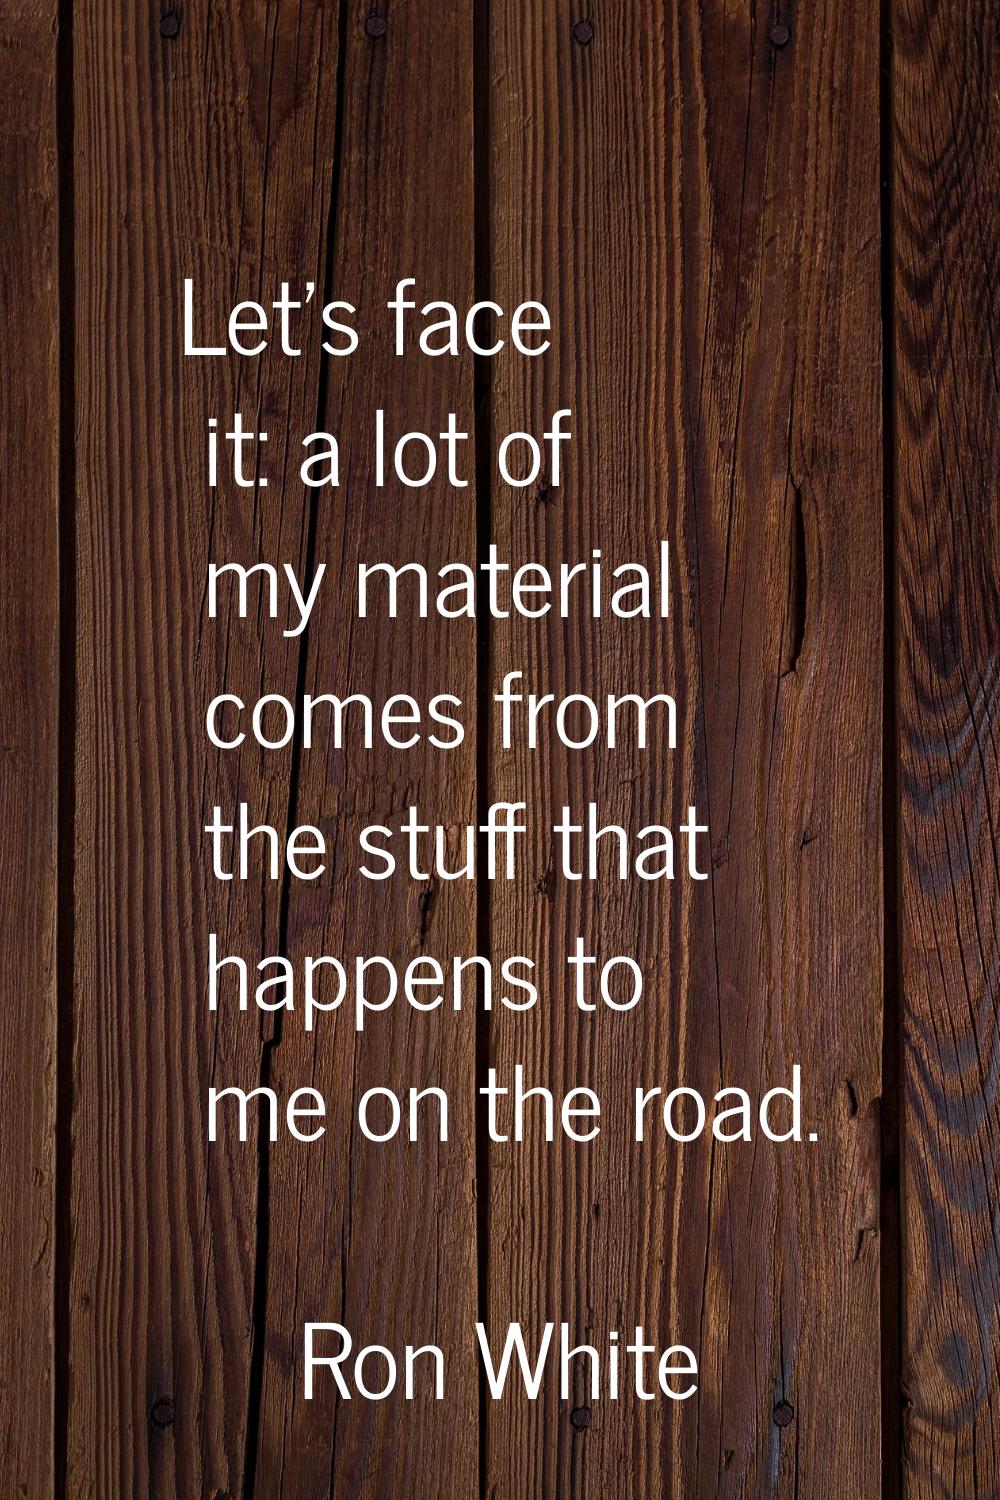 Let's face it: a lot of my material comes from the stuff that happens to me on the road.